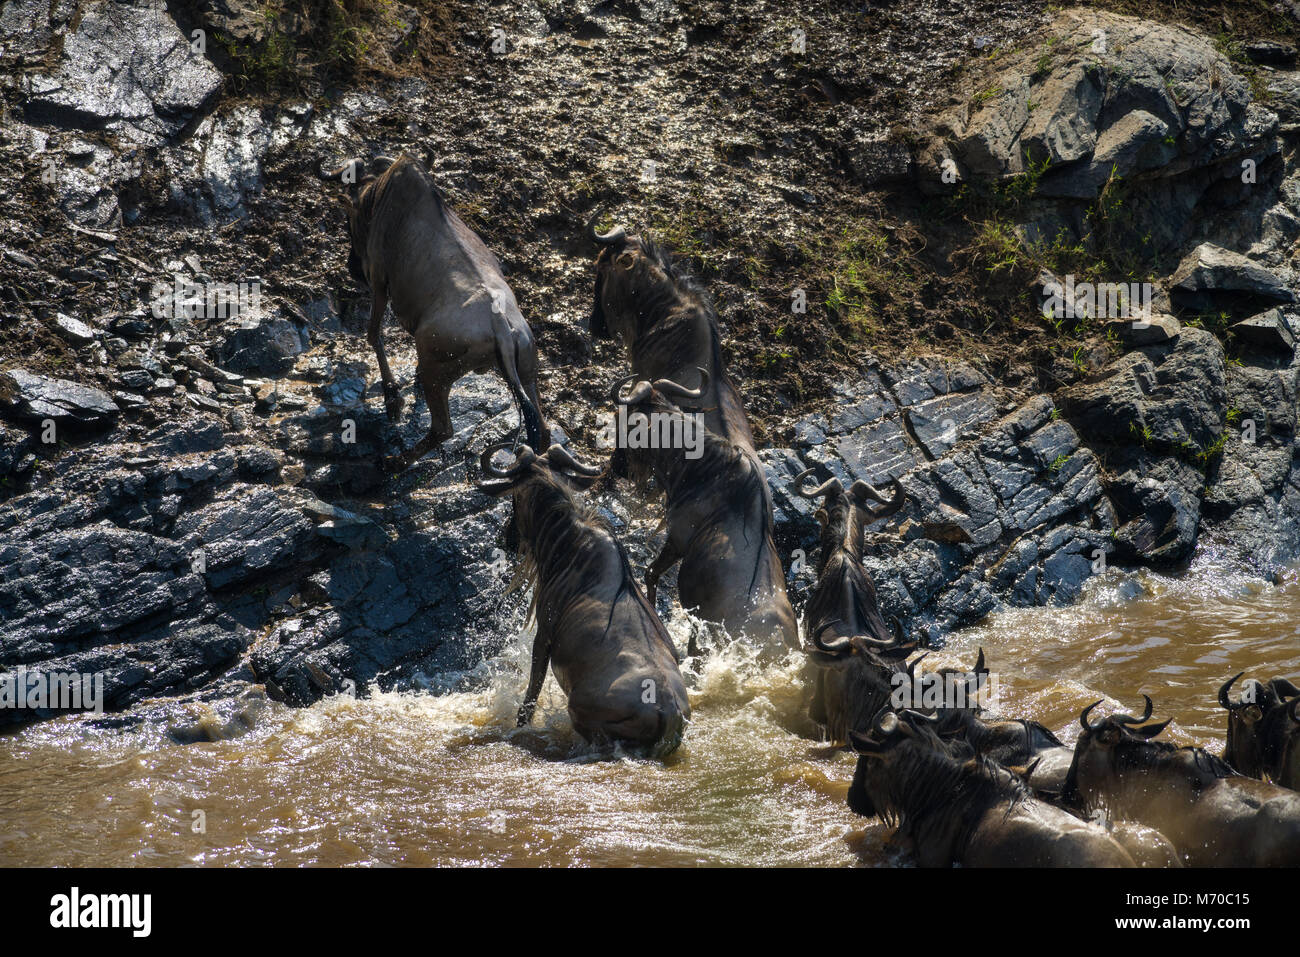 A herd of blue wildebeest (Connochaetes taurinus mearnsi) crossing a river during migration, Masai Mara, Kenya Stock Photo